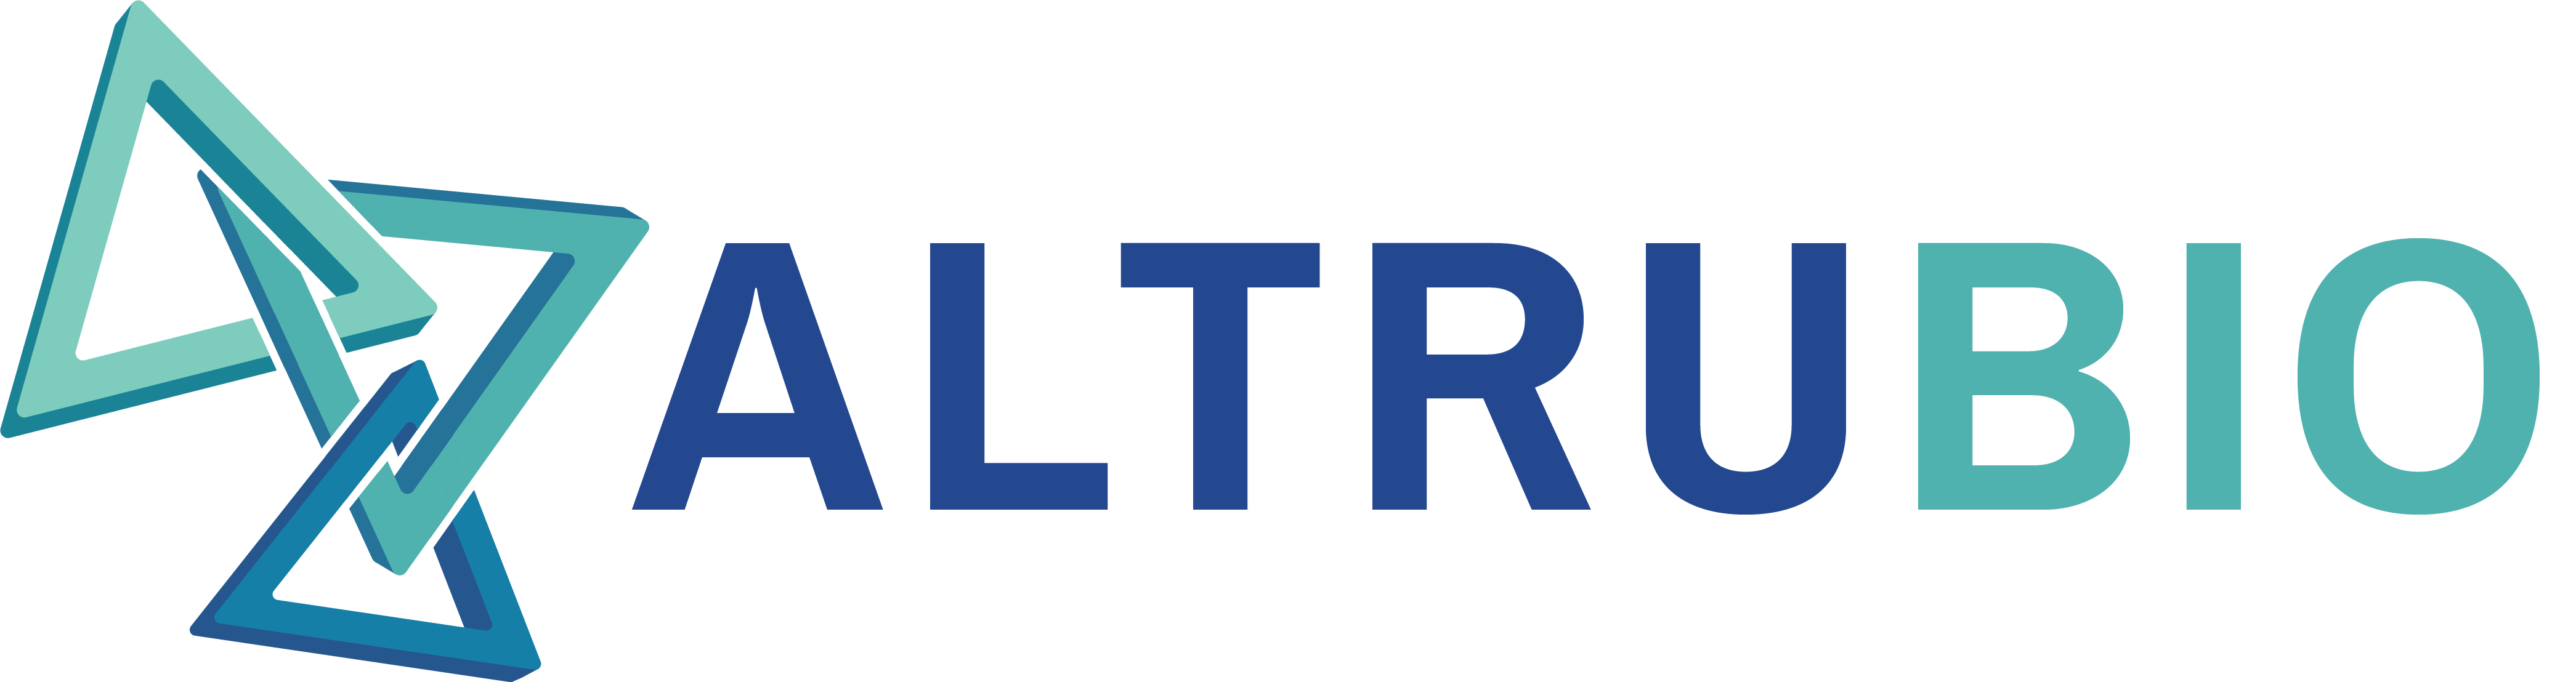 AltruBio Presents New Positive Data from its Completed Phase 1b Study Evaluating ALTB-168 in Patients with Steroid-Refractory or Treatment-Refractory Acute Graft-Versus-Host-Disease at the 64th ASH Annual Meeting 2022